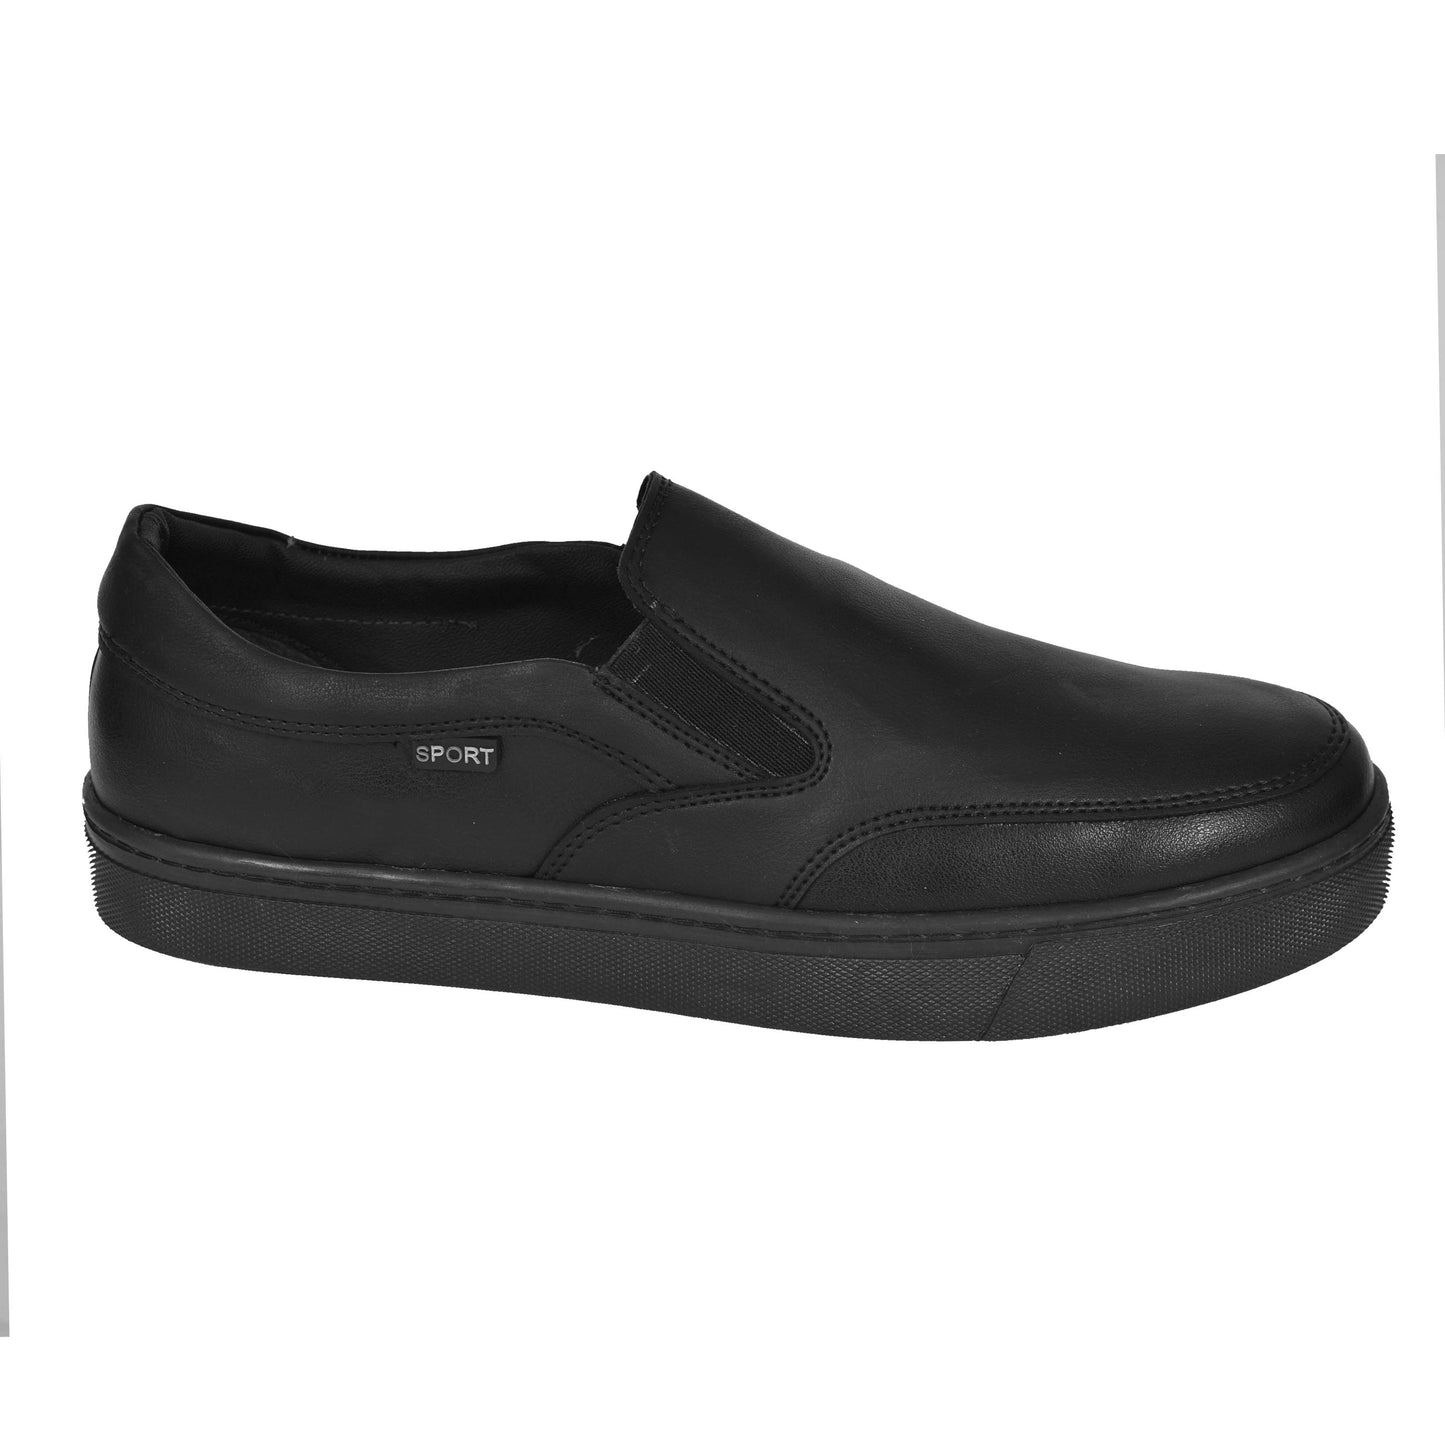 2H #9528 Black Casual Shoes